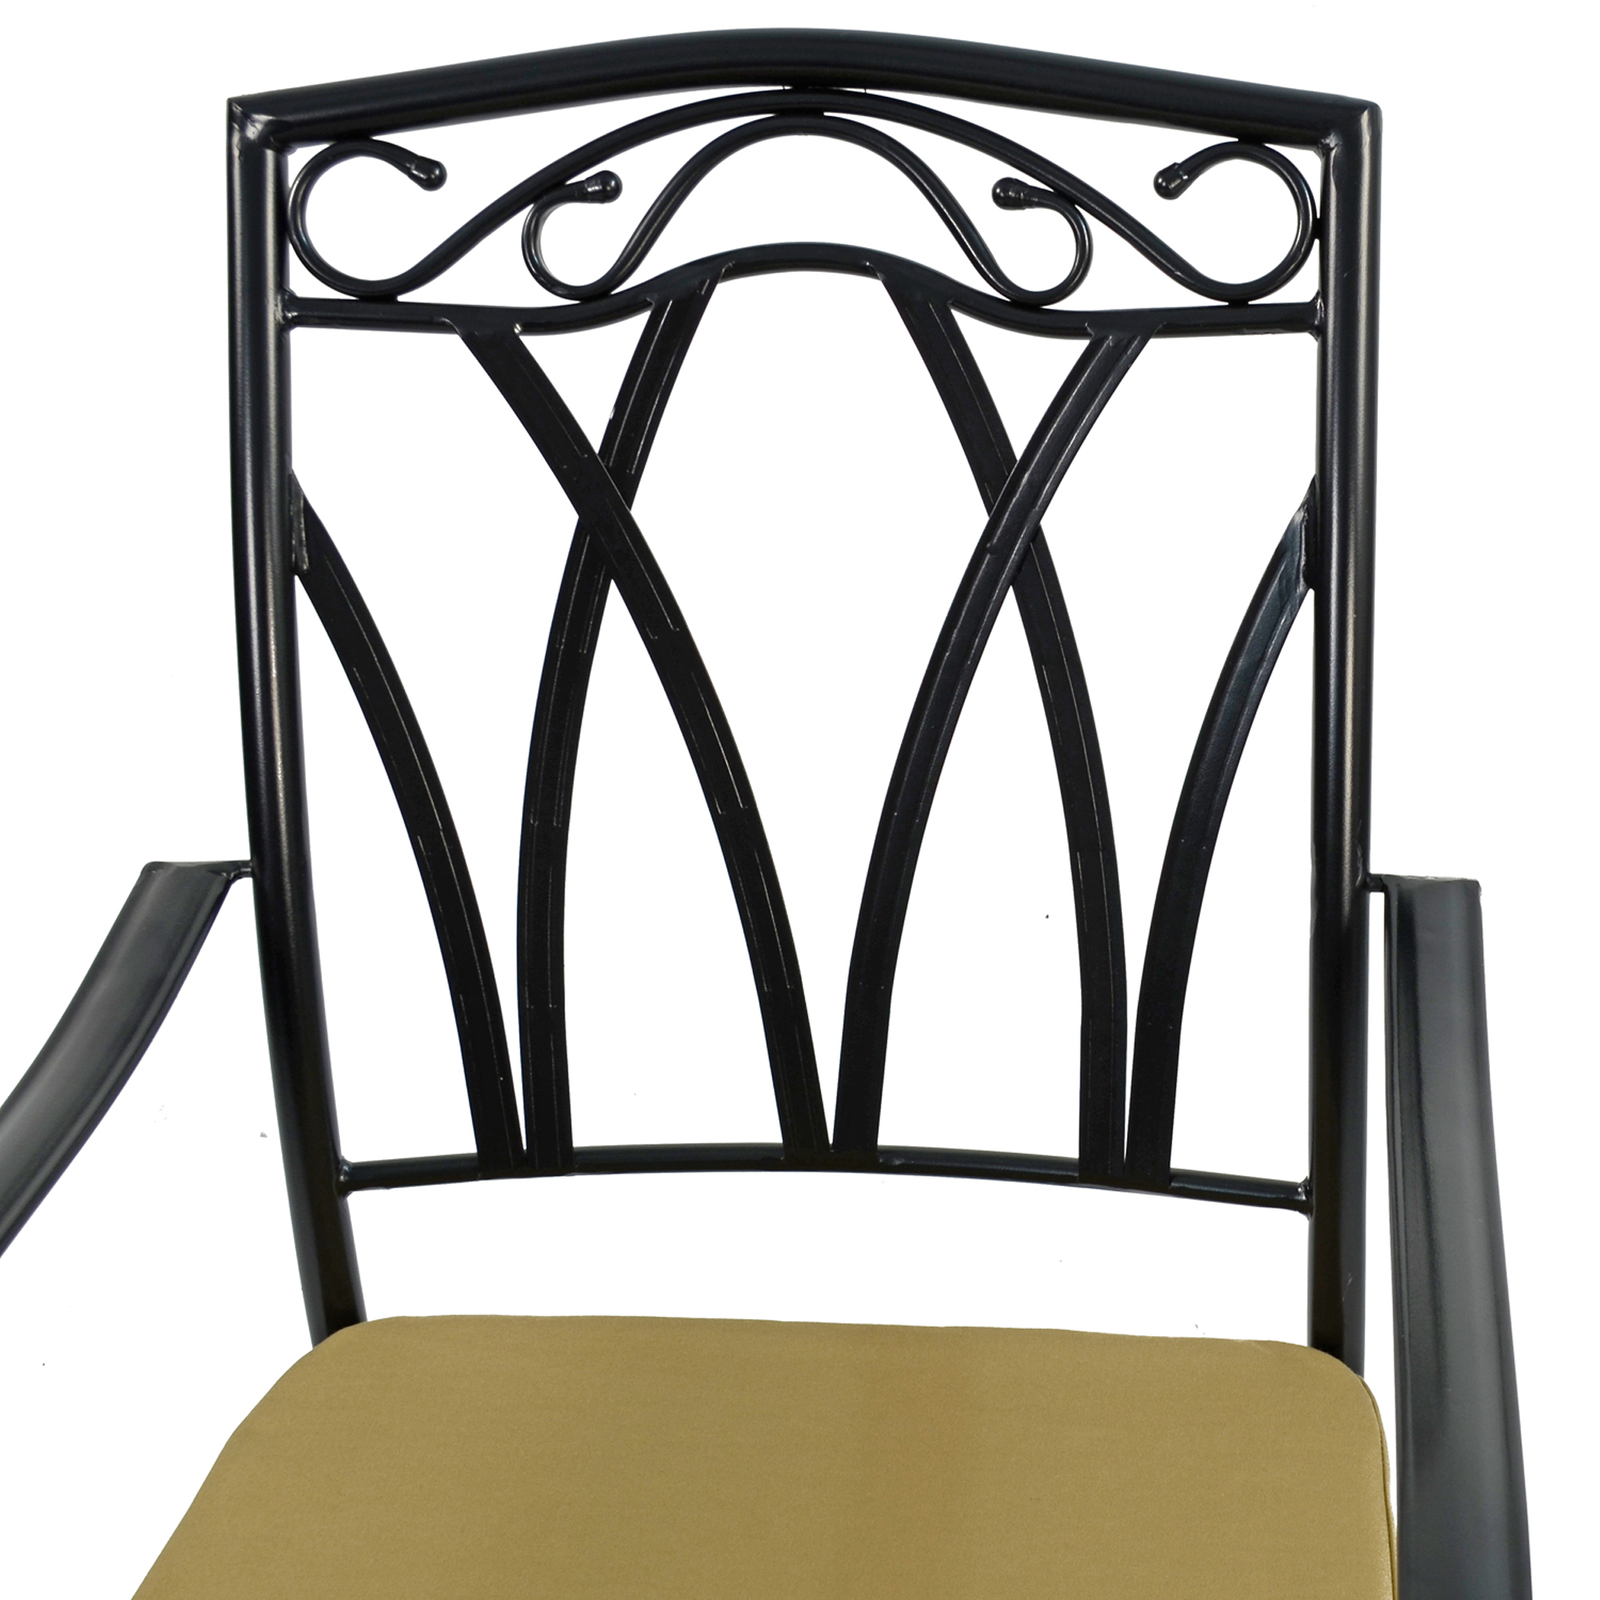 Exclusive Garden Granada 91cm Table With 4 Ascot Chairs Set Dining Sets Exclusive Garden   